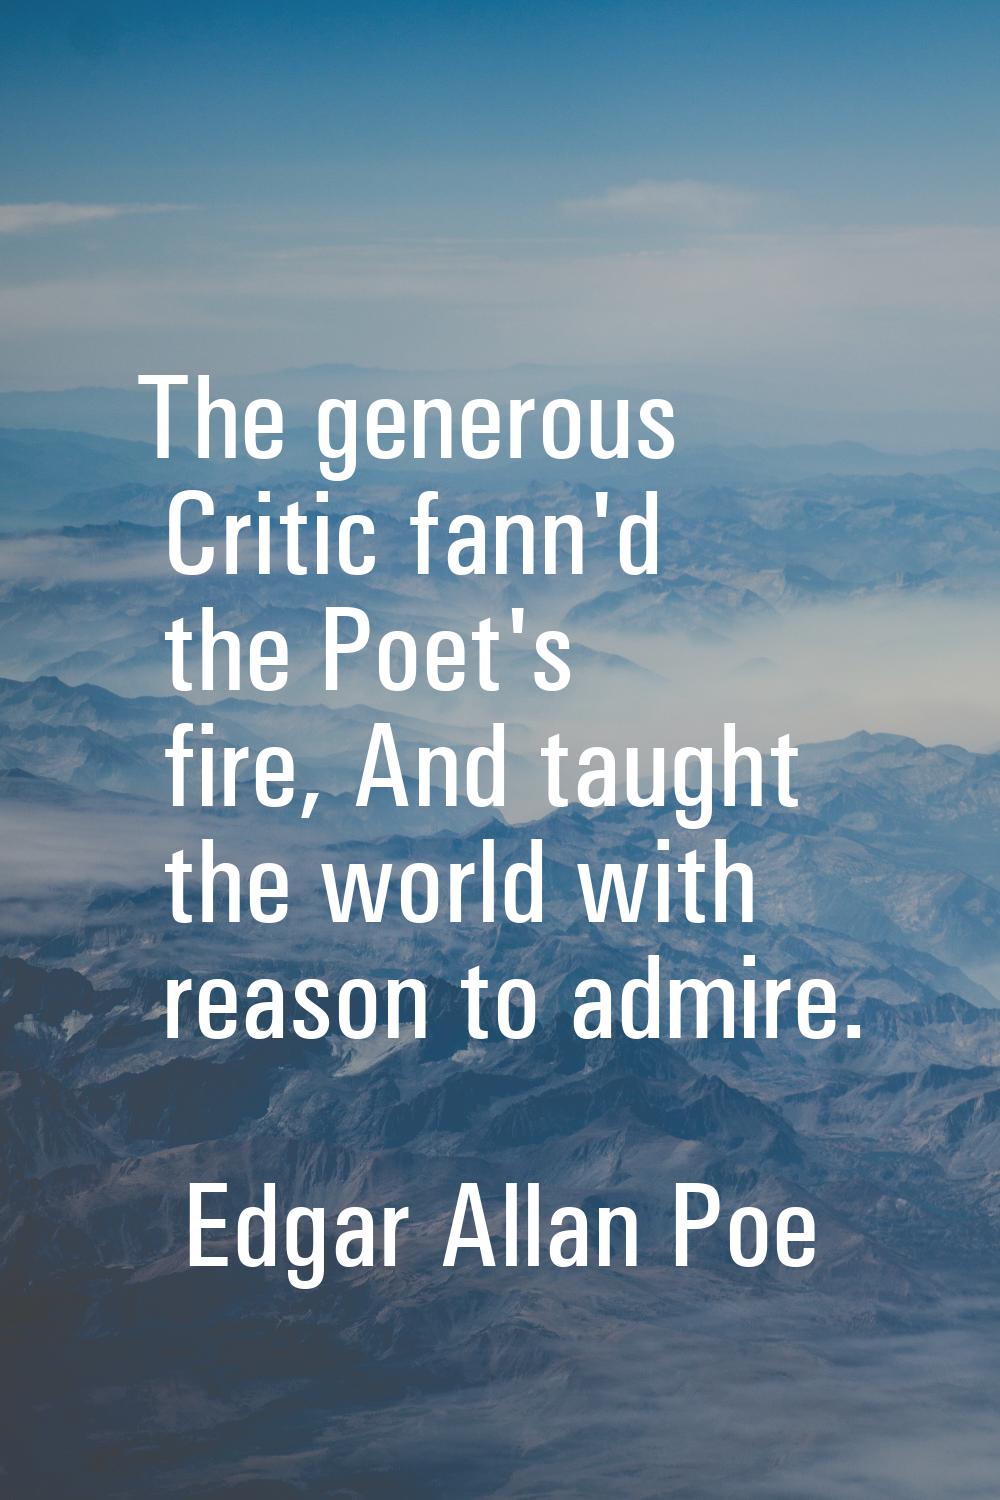 The generous Critic fann'd the Poet's fire, And taught the world with reason to admire.